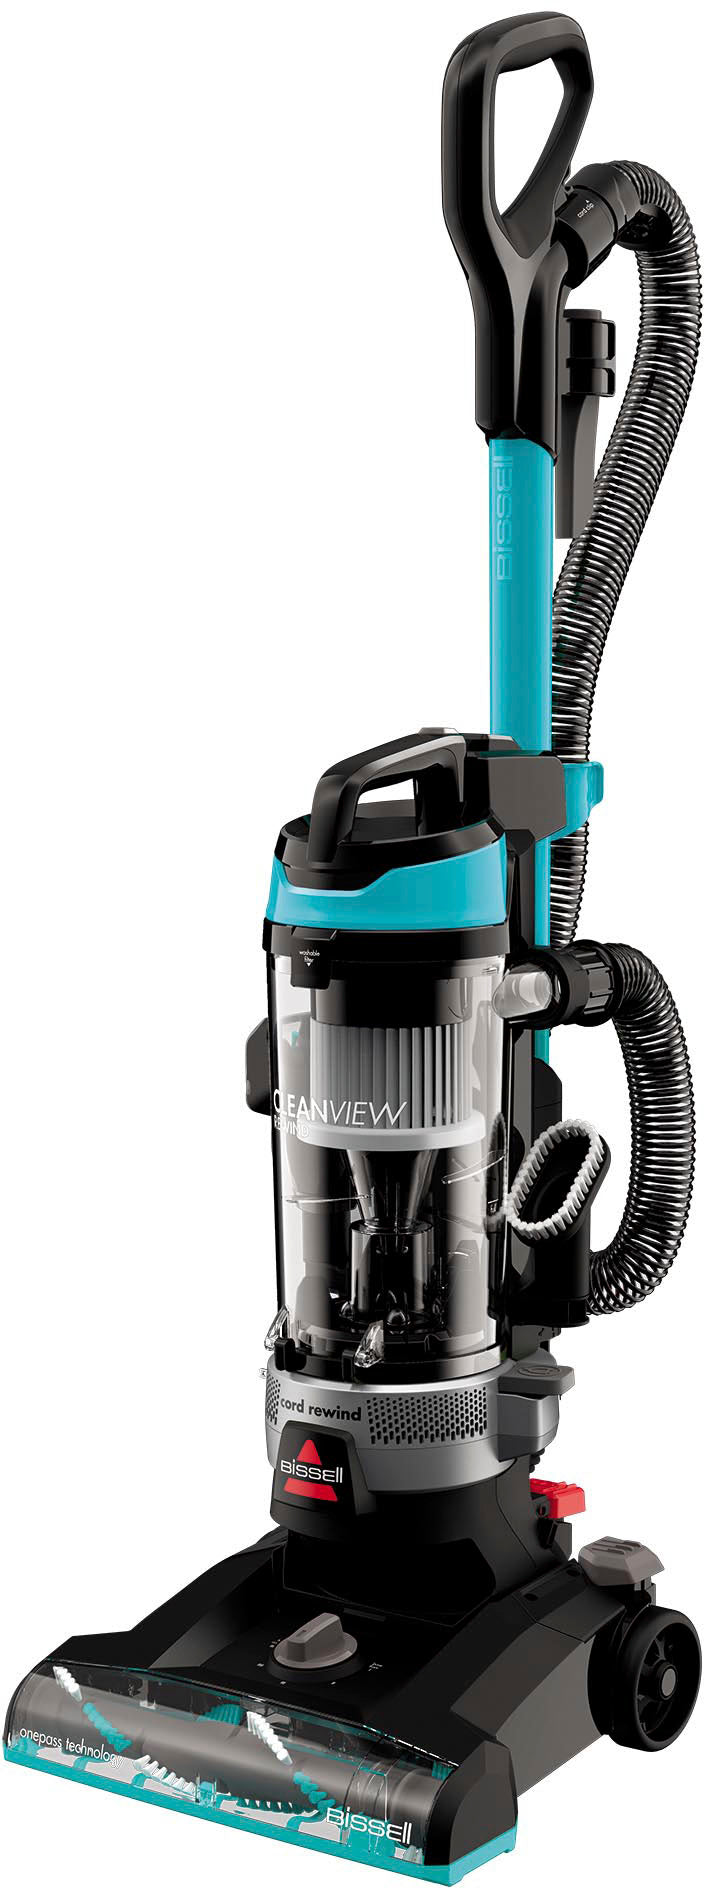 BISSELL - CleanView Rewind Upright Vacuum Cleaner - Black with Electric Blue accents_2